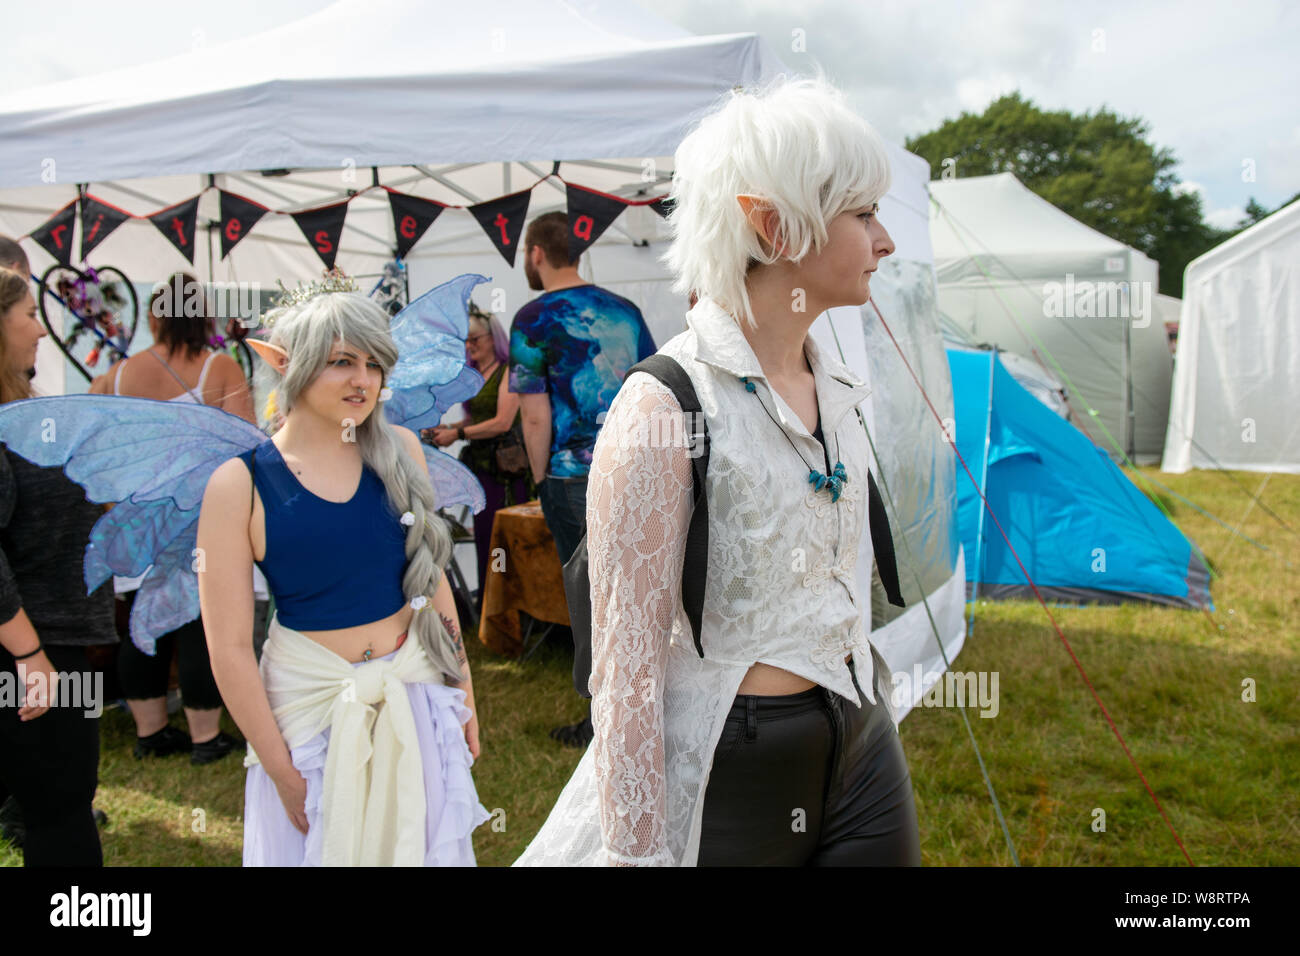 Burley, Ringwood, New Forest, Hampshire, England, UK. August, 2019. The New Forest Fairy Festival. Festival goers dressed up in fairy fancy dress. Stock Photo